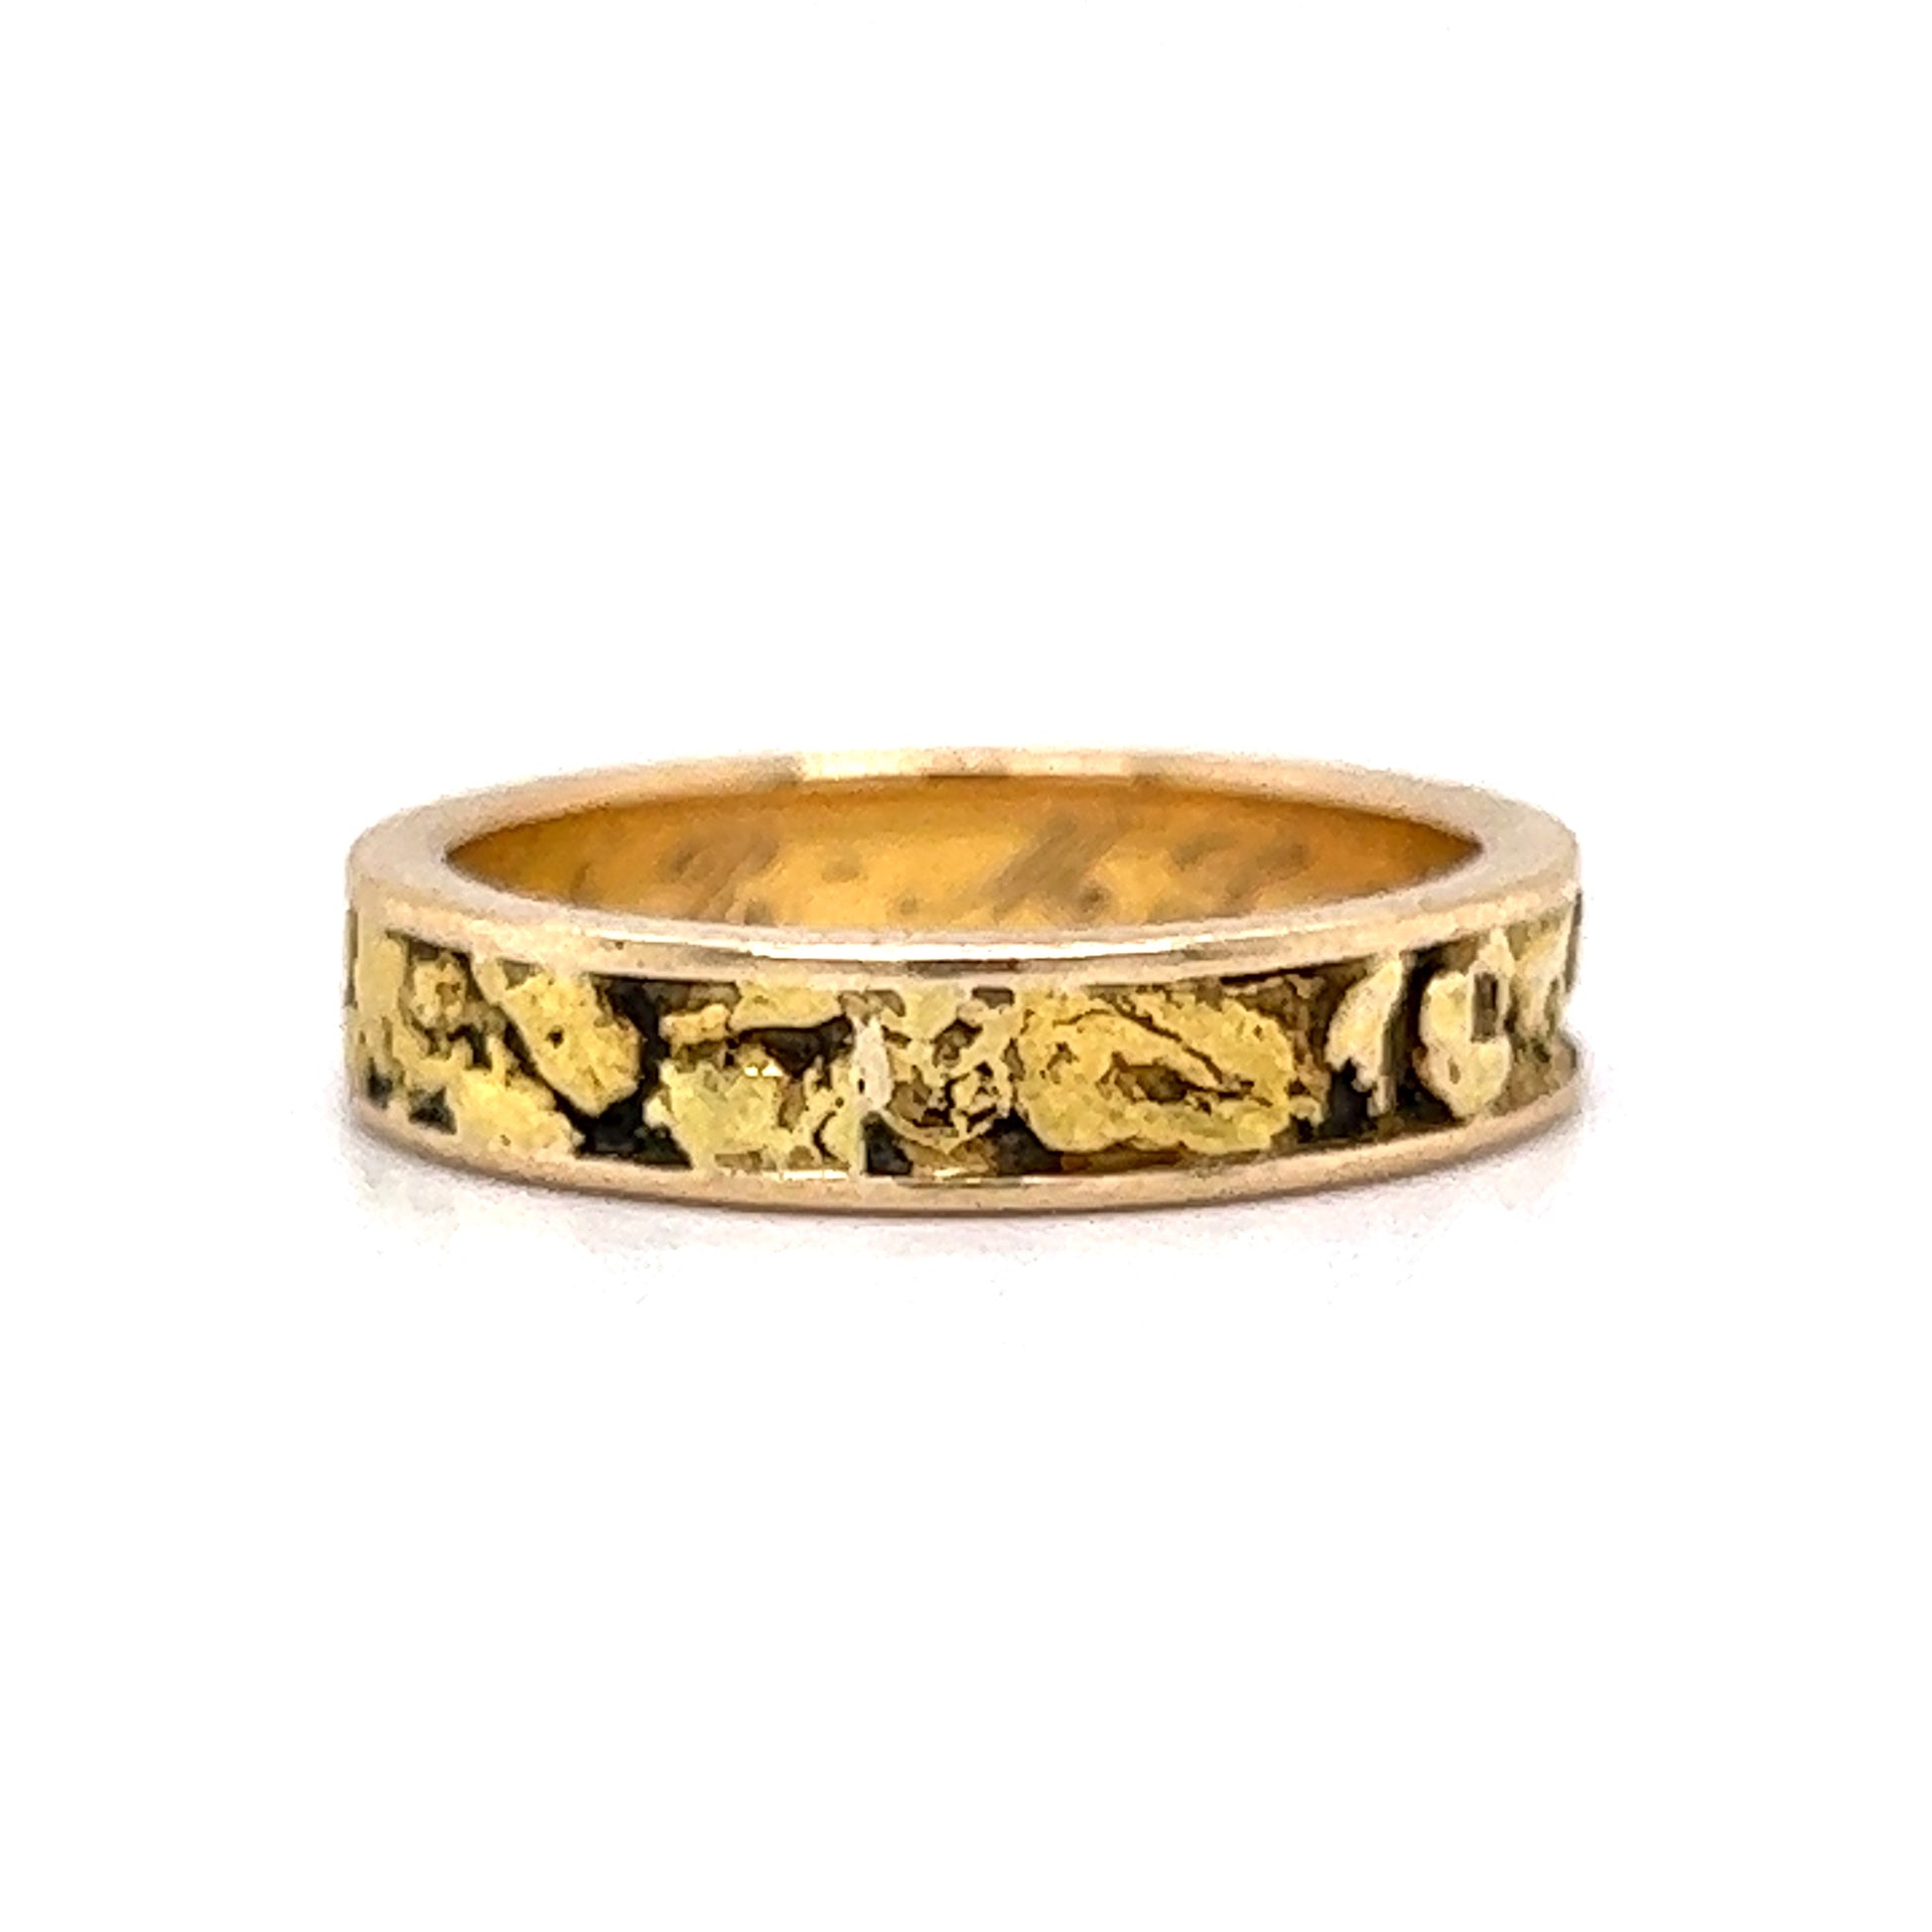 Mid-Century Gold Nugget Wedding Band in 14k Yellow GoldComposition: 14 Karat Yellow GoldRing Size: 4.75Total Gram Weight: 3.9 gInscription: 14k MFR - MJ  6-18-'66